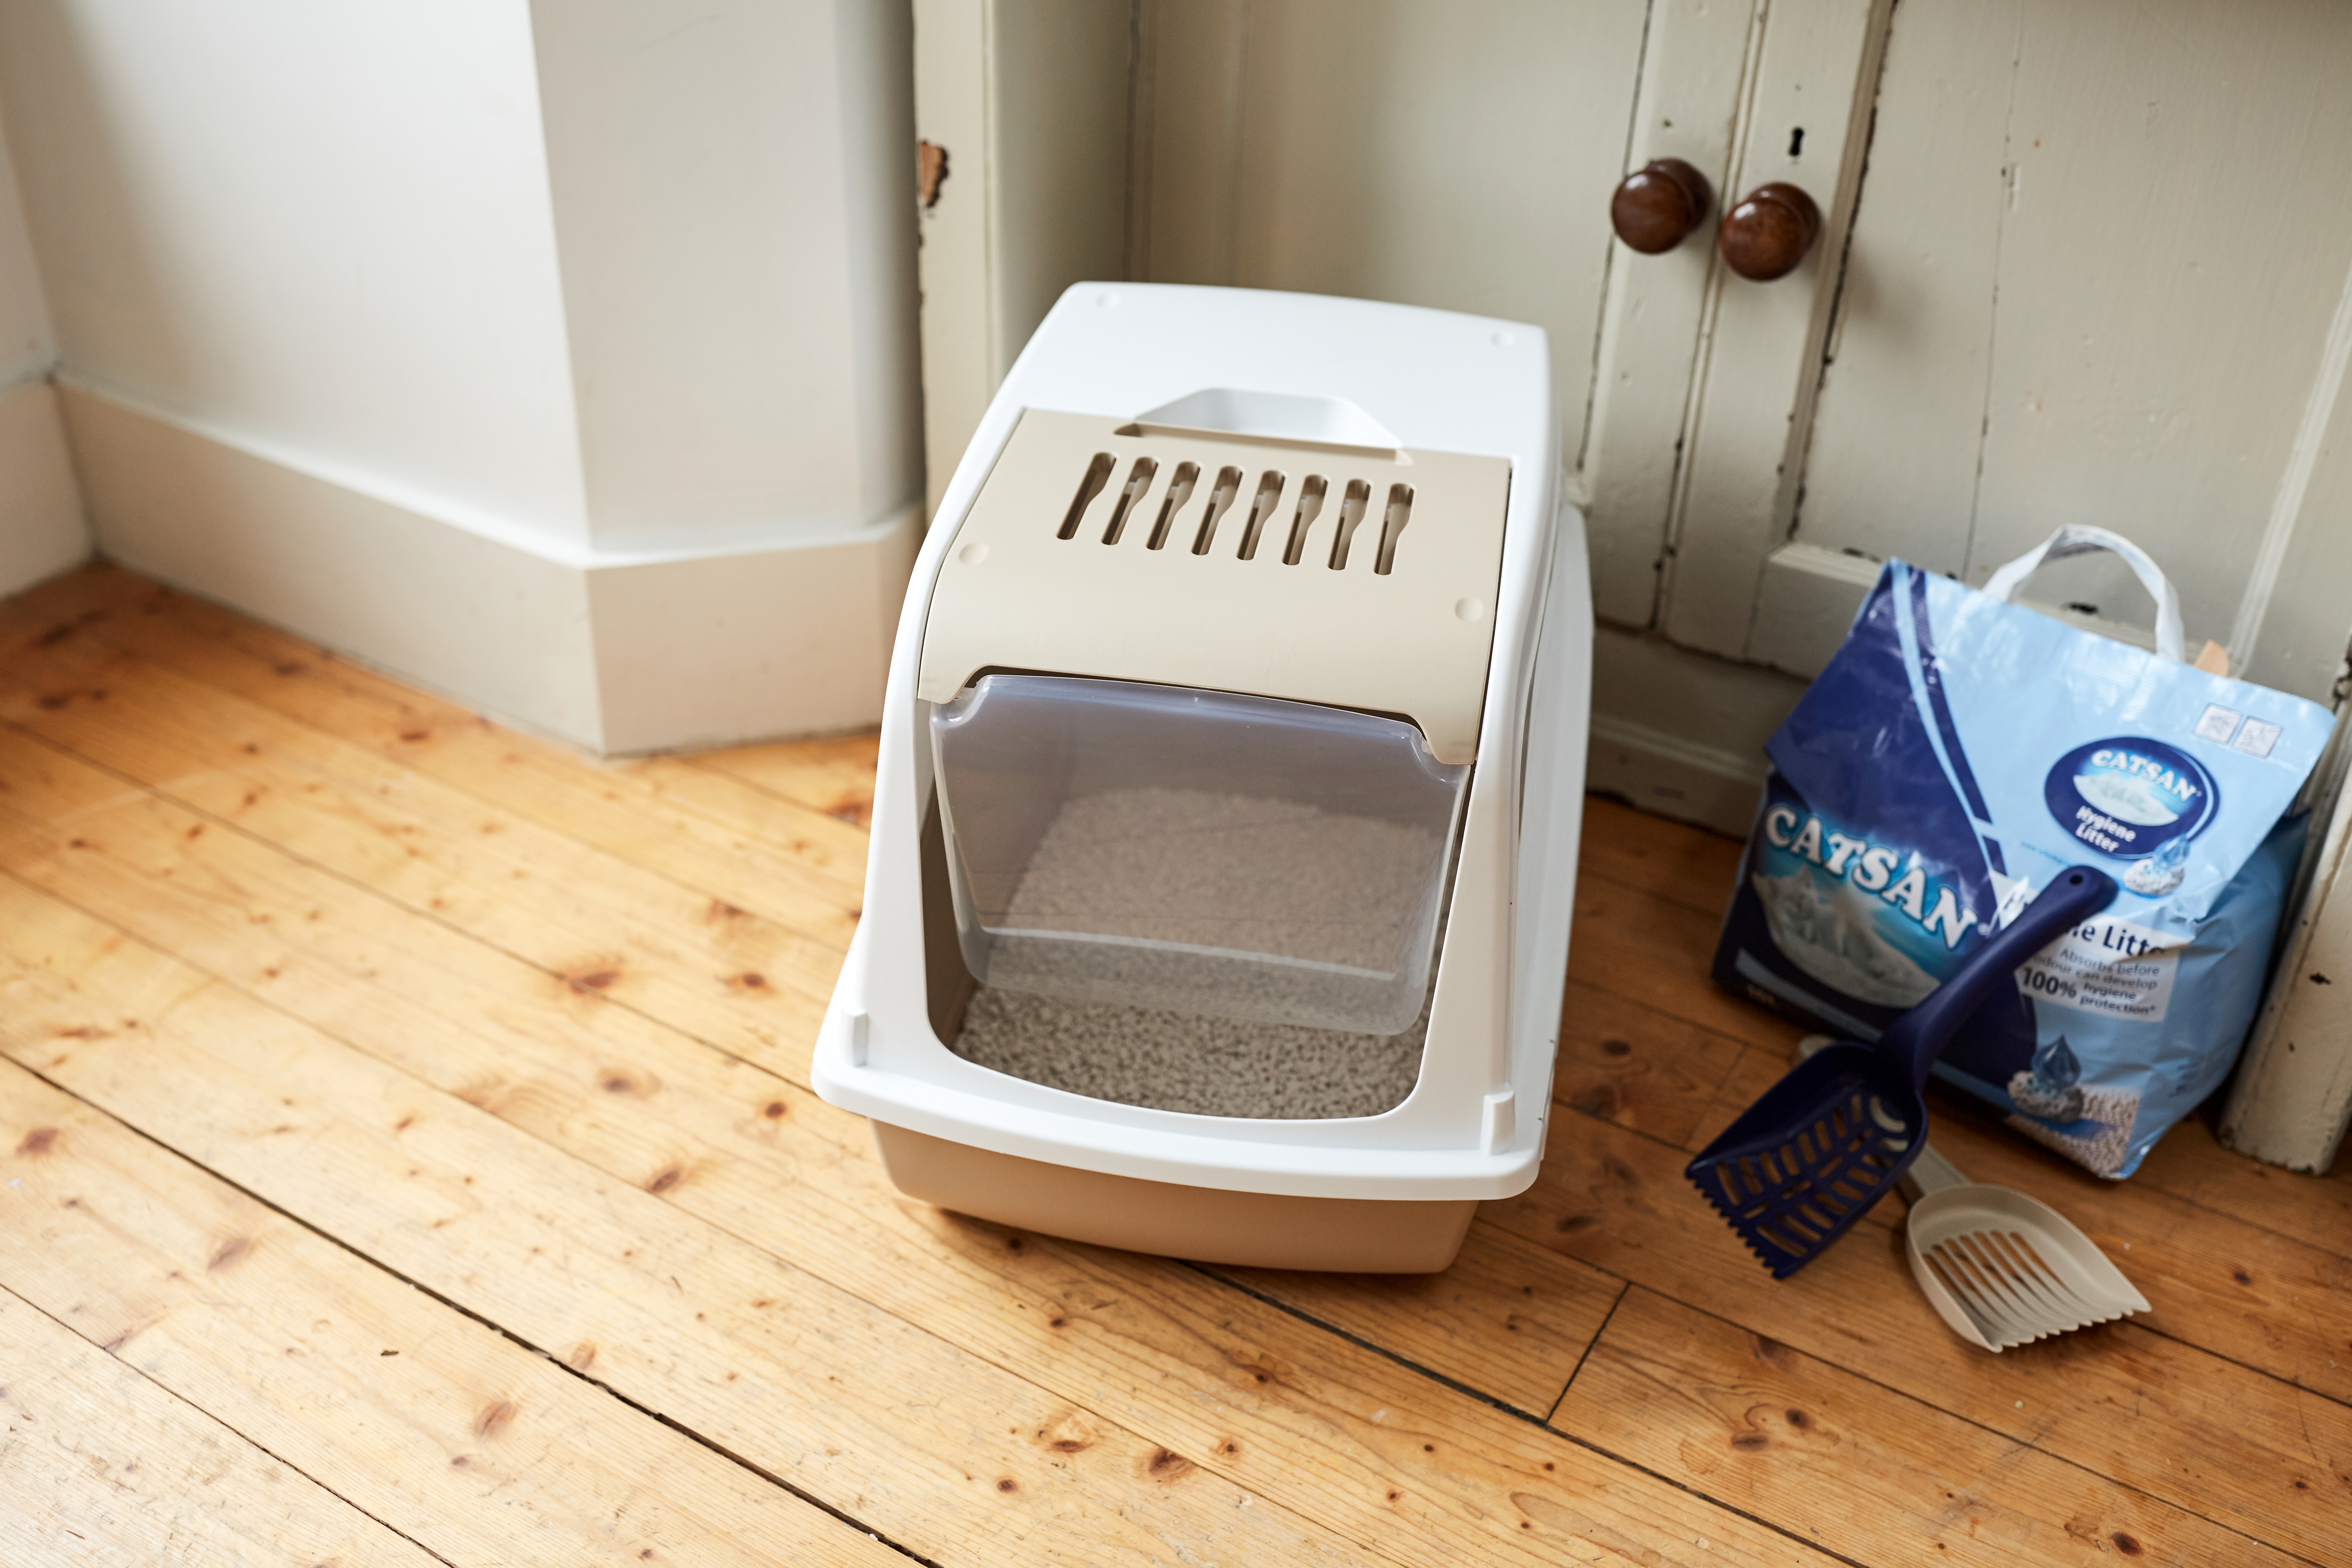 Covered litter trays are popular with owners